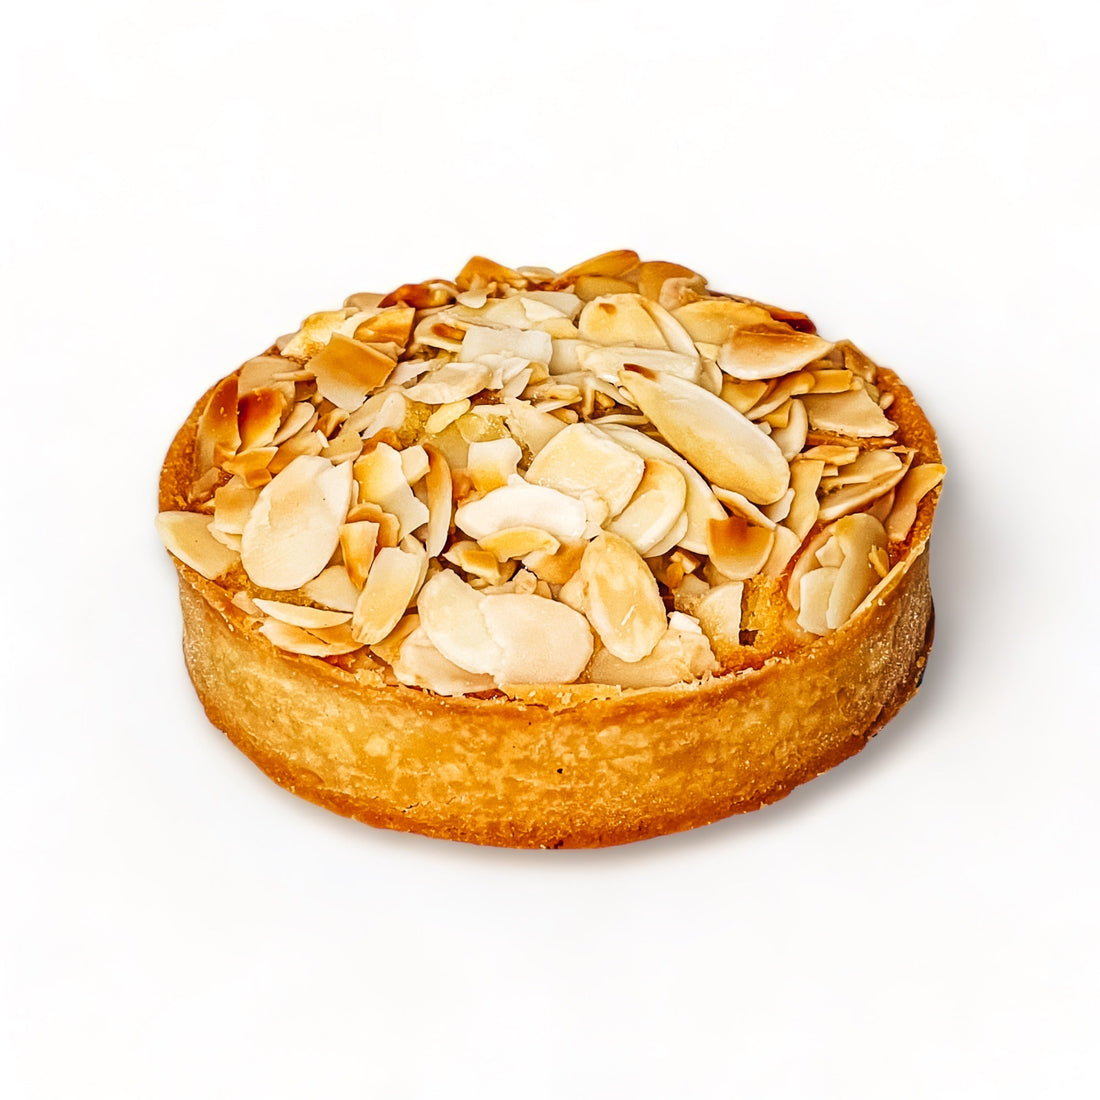 Discover the Heavenly French Almond Tart